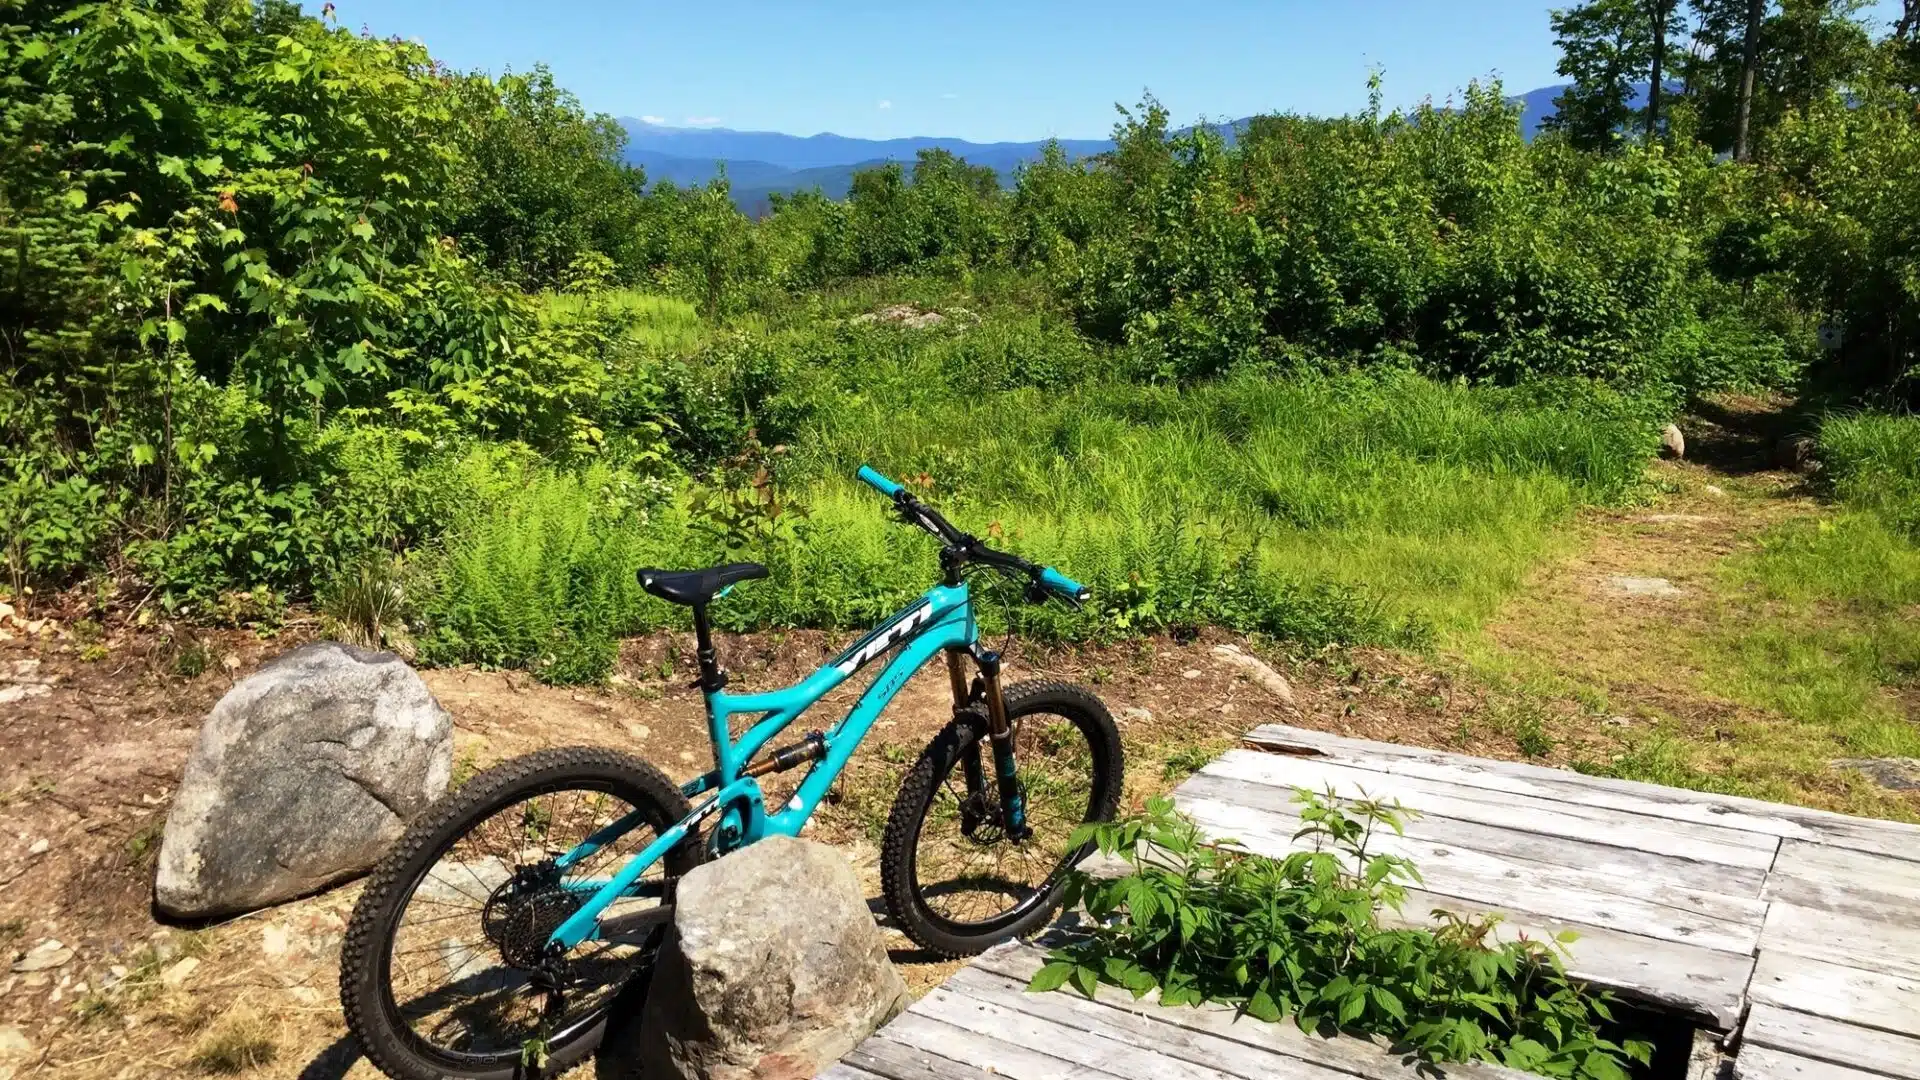 bike on a hiking trail|road leading to the PRKR MTN trailhead Littleton New Hampshire|parked bicycle on the Parker Trails PRKR Mountain trails in Littleton New Hampshire|trail sign in the woods at Parker Trails